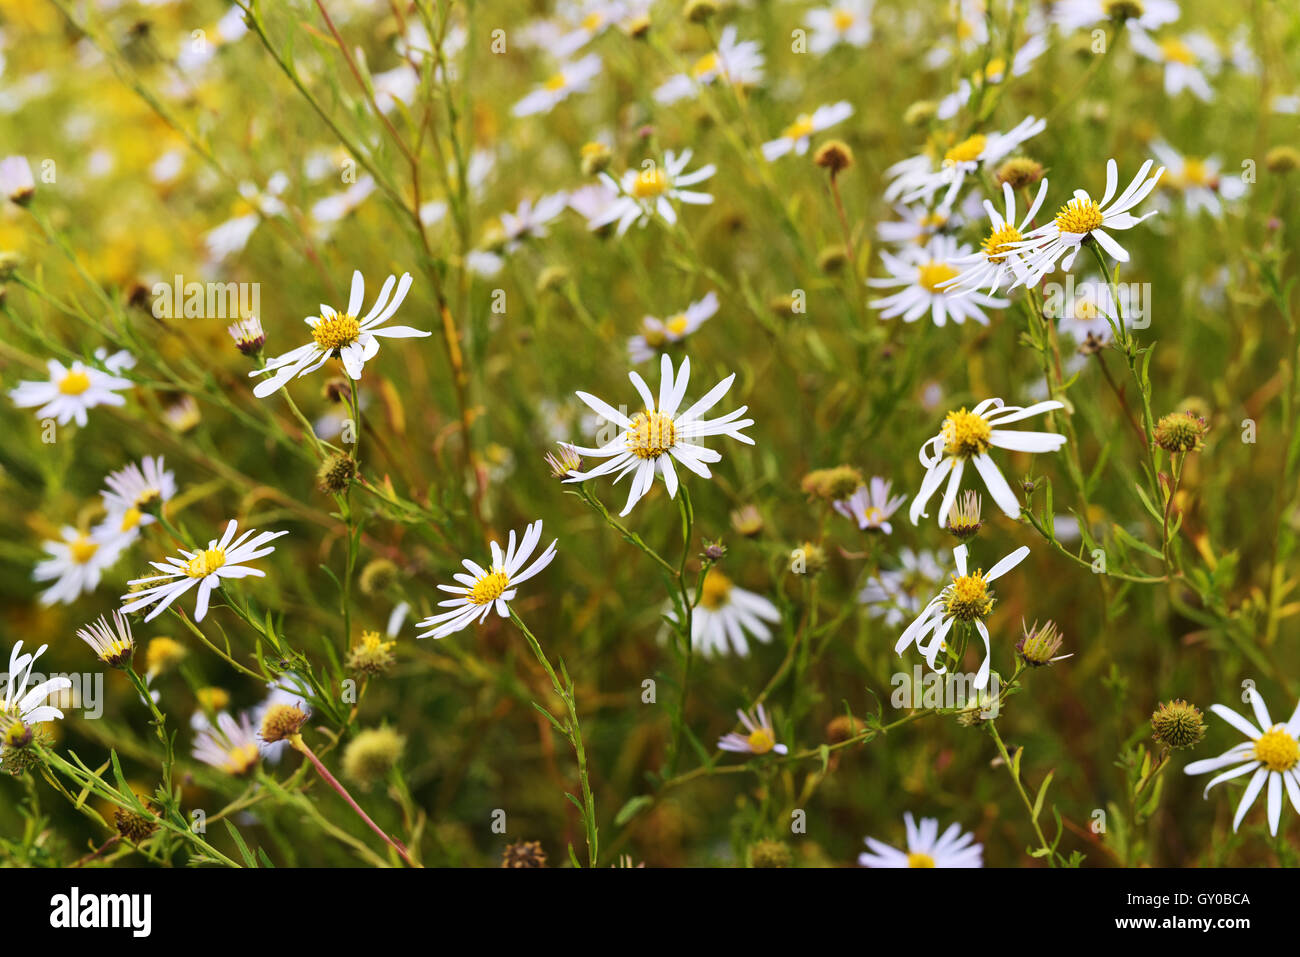 Autumn daisies on a park meadow close-up Stock Photo